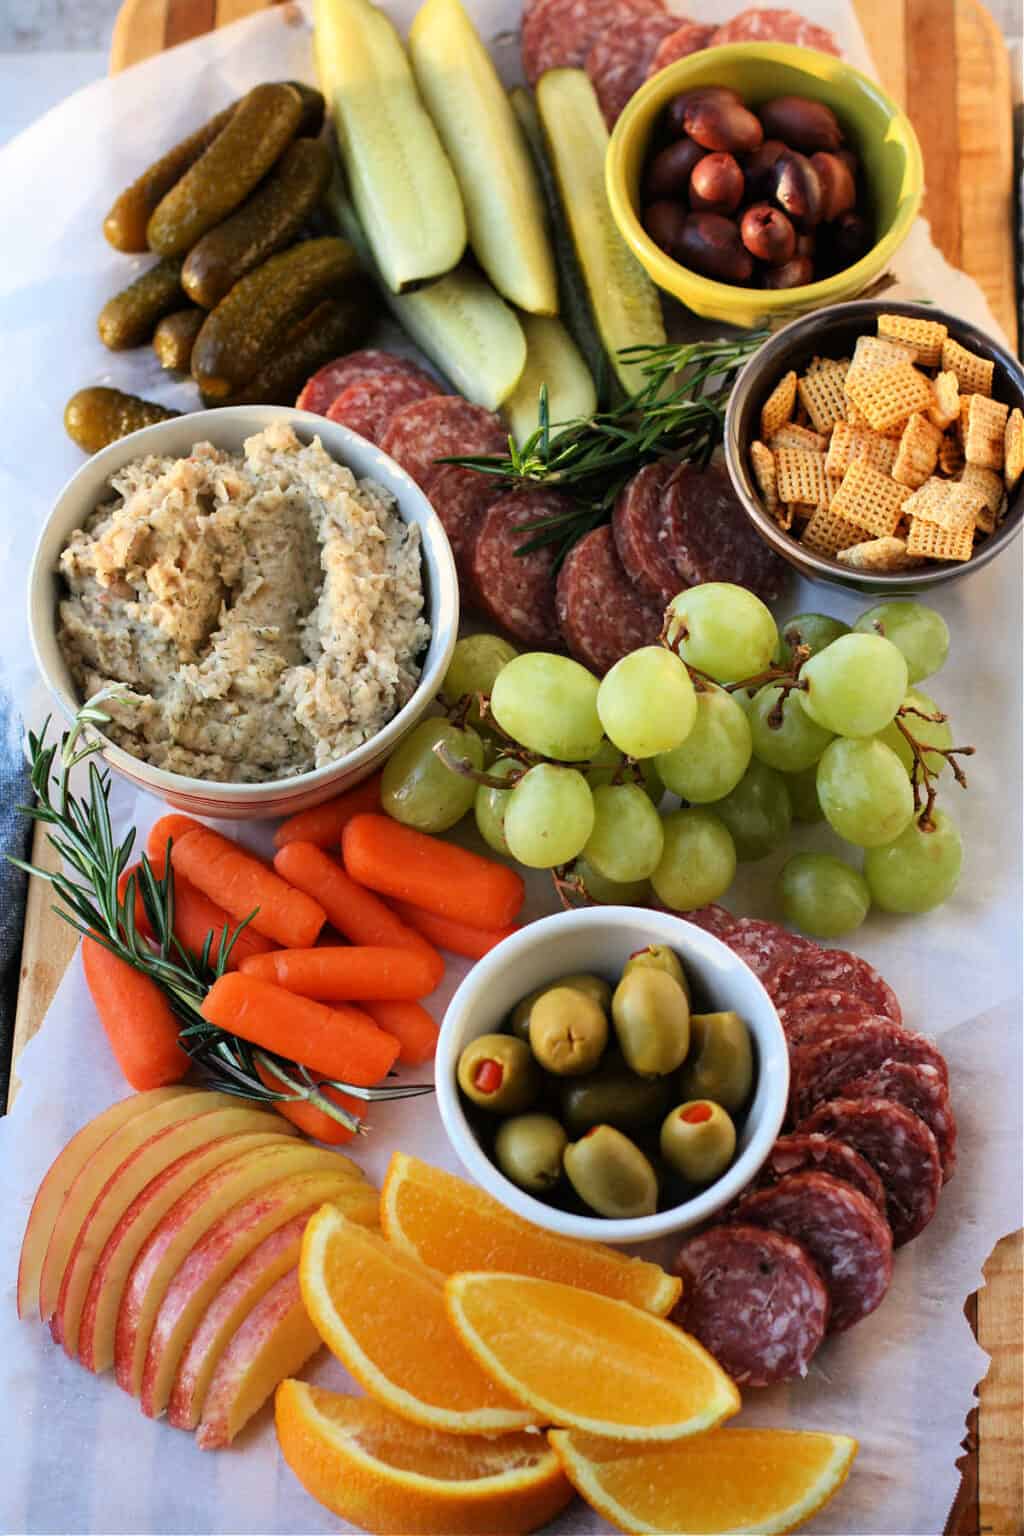 How to Make a Gluten Free Dairy Free Charcuterie Board. - The Pretty Bee